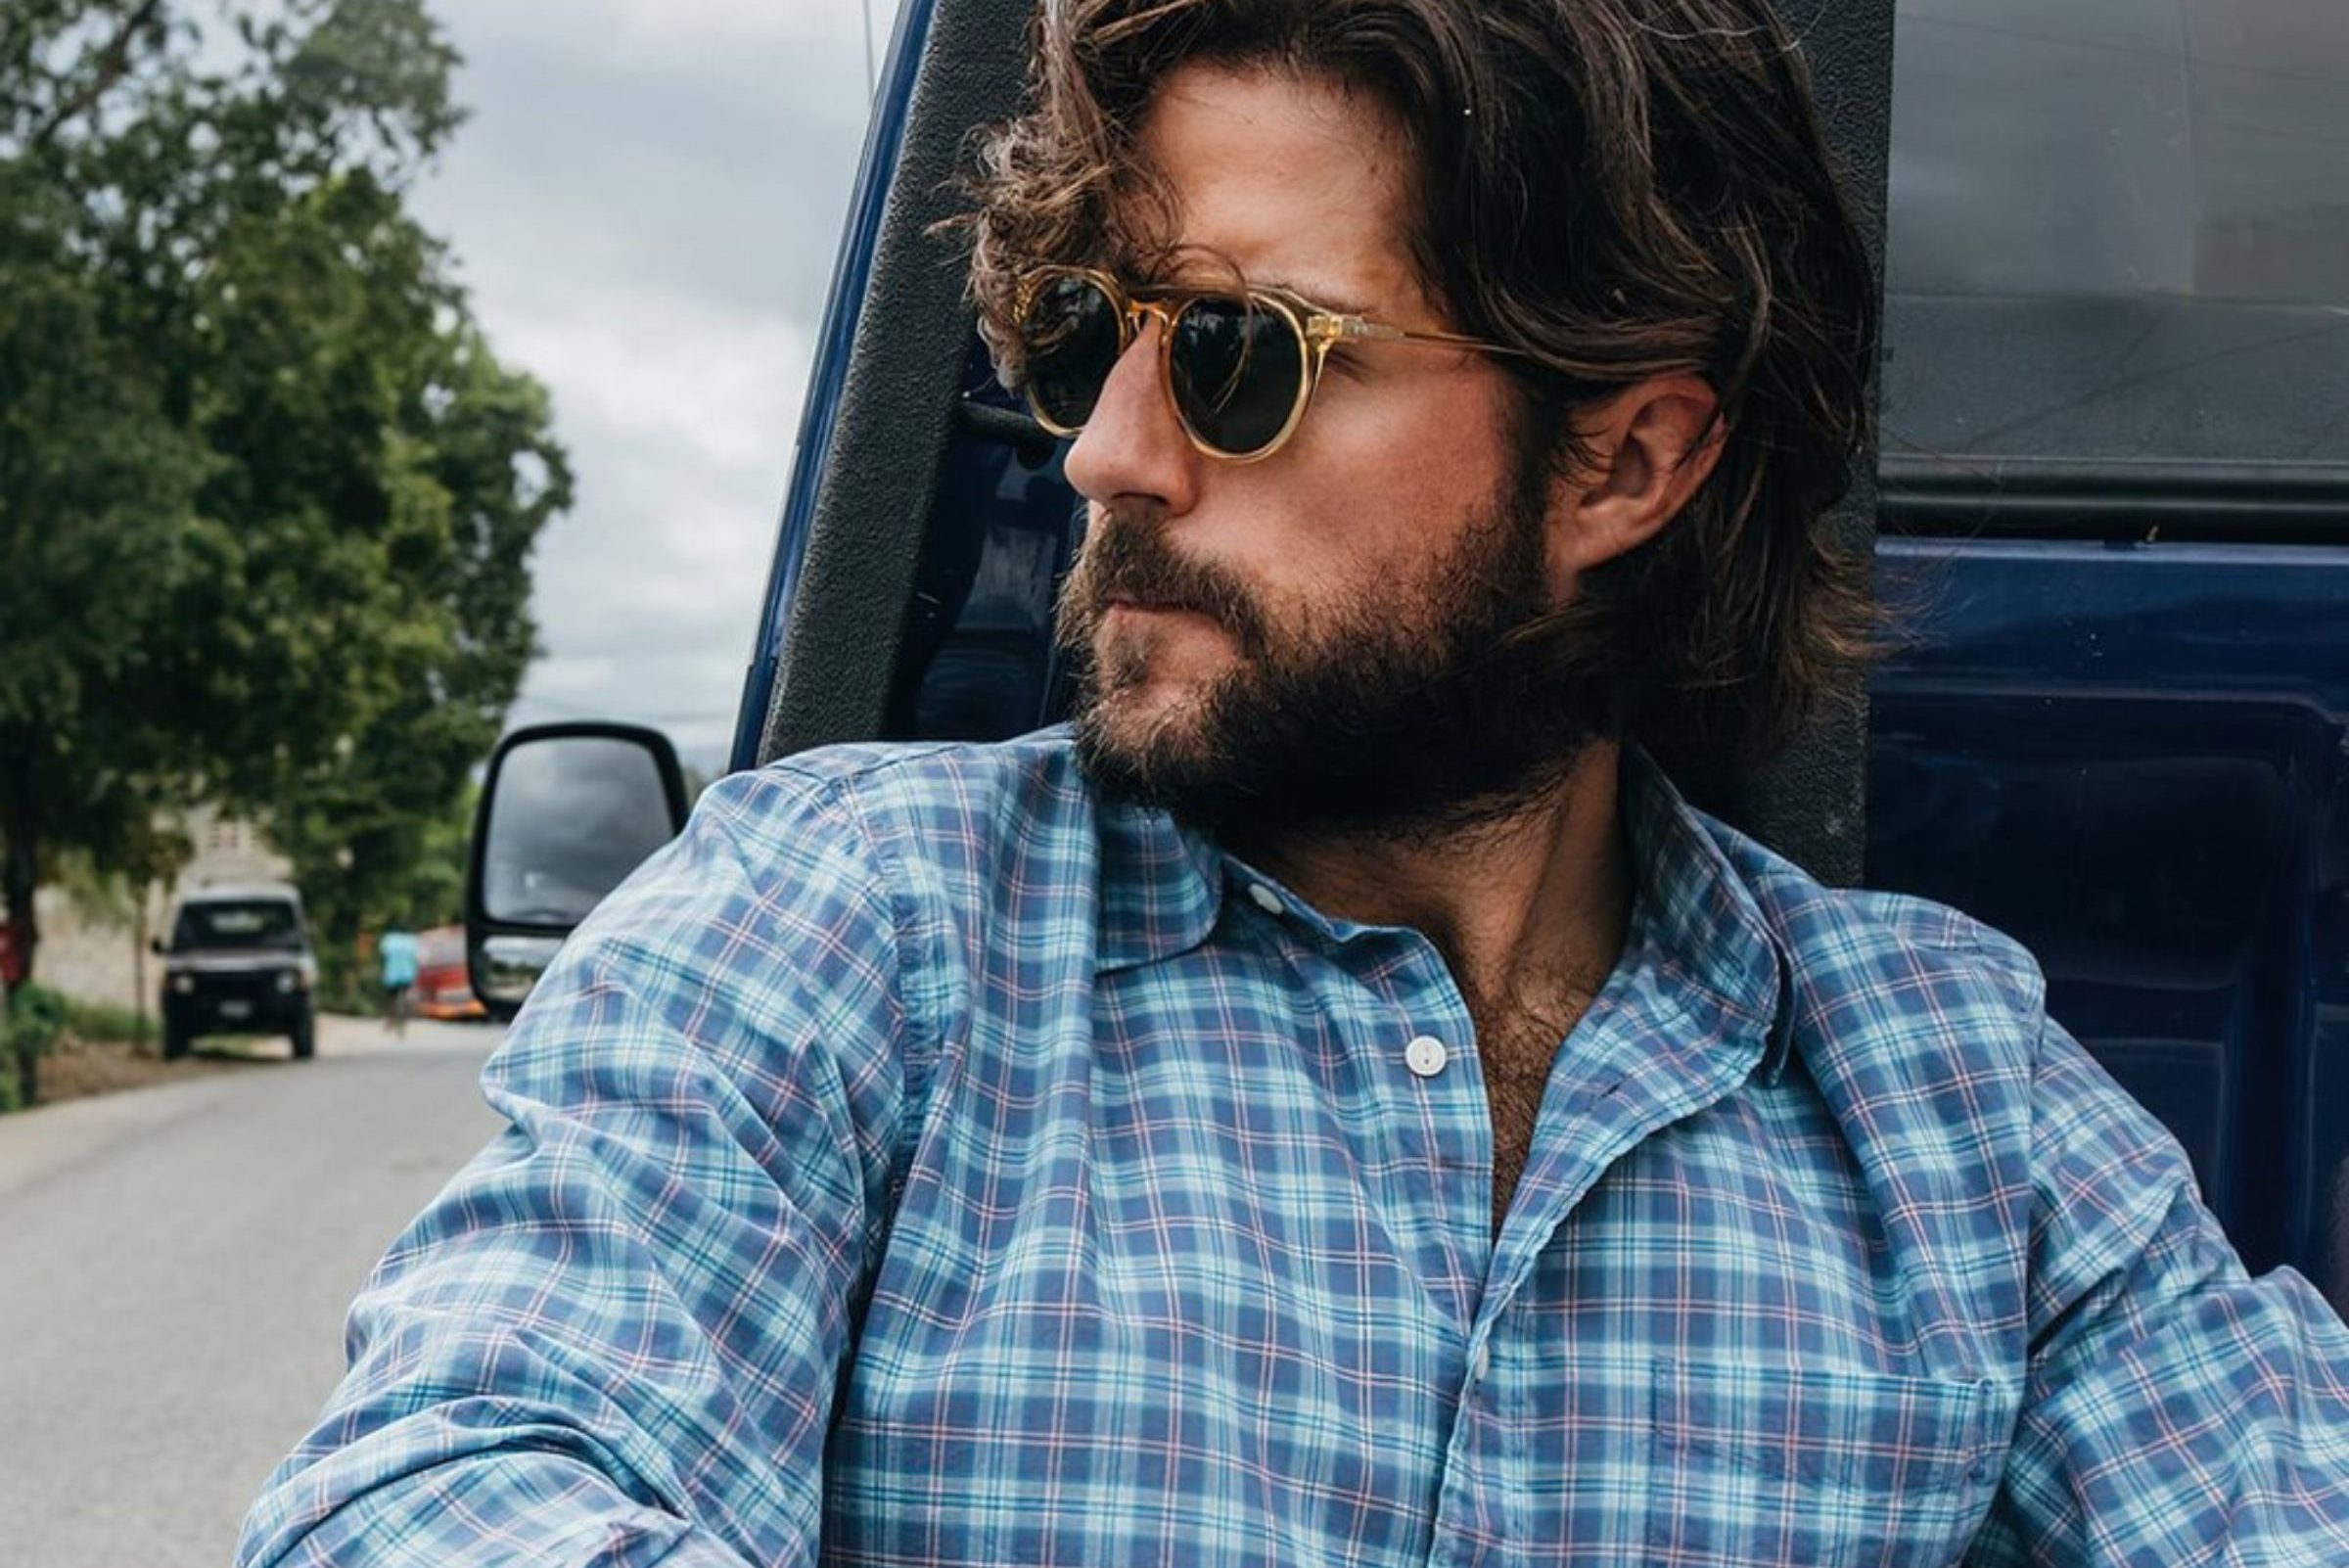 15 Garments We're Buying At Faherty Brand's Cyber Monday Sale—Up To 50% Off